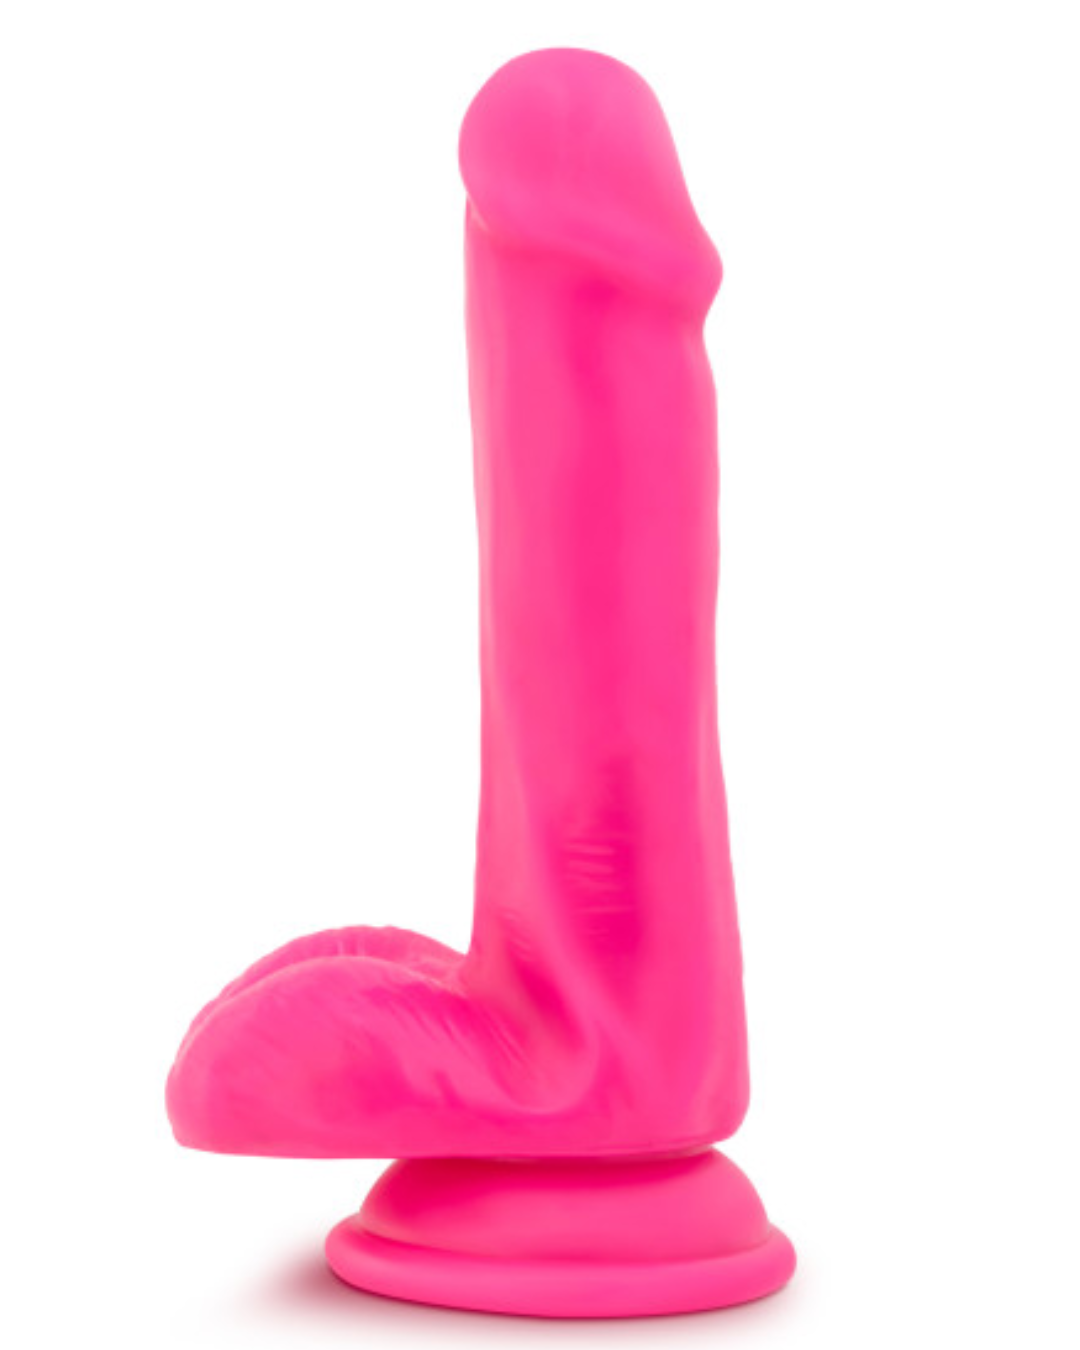 Dildos - All Sizes, Shapes & Colours